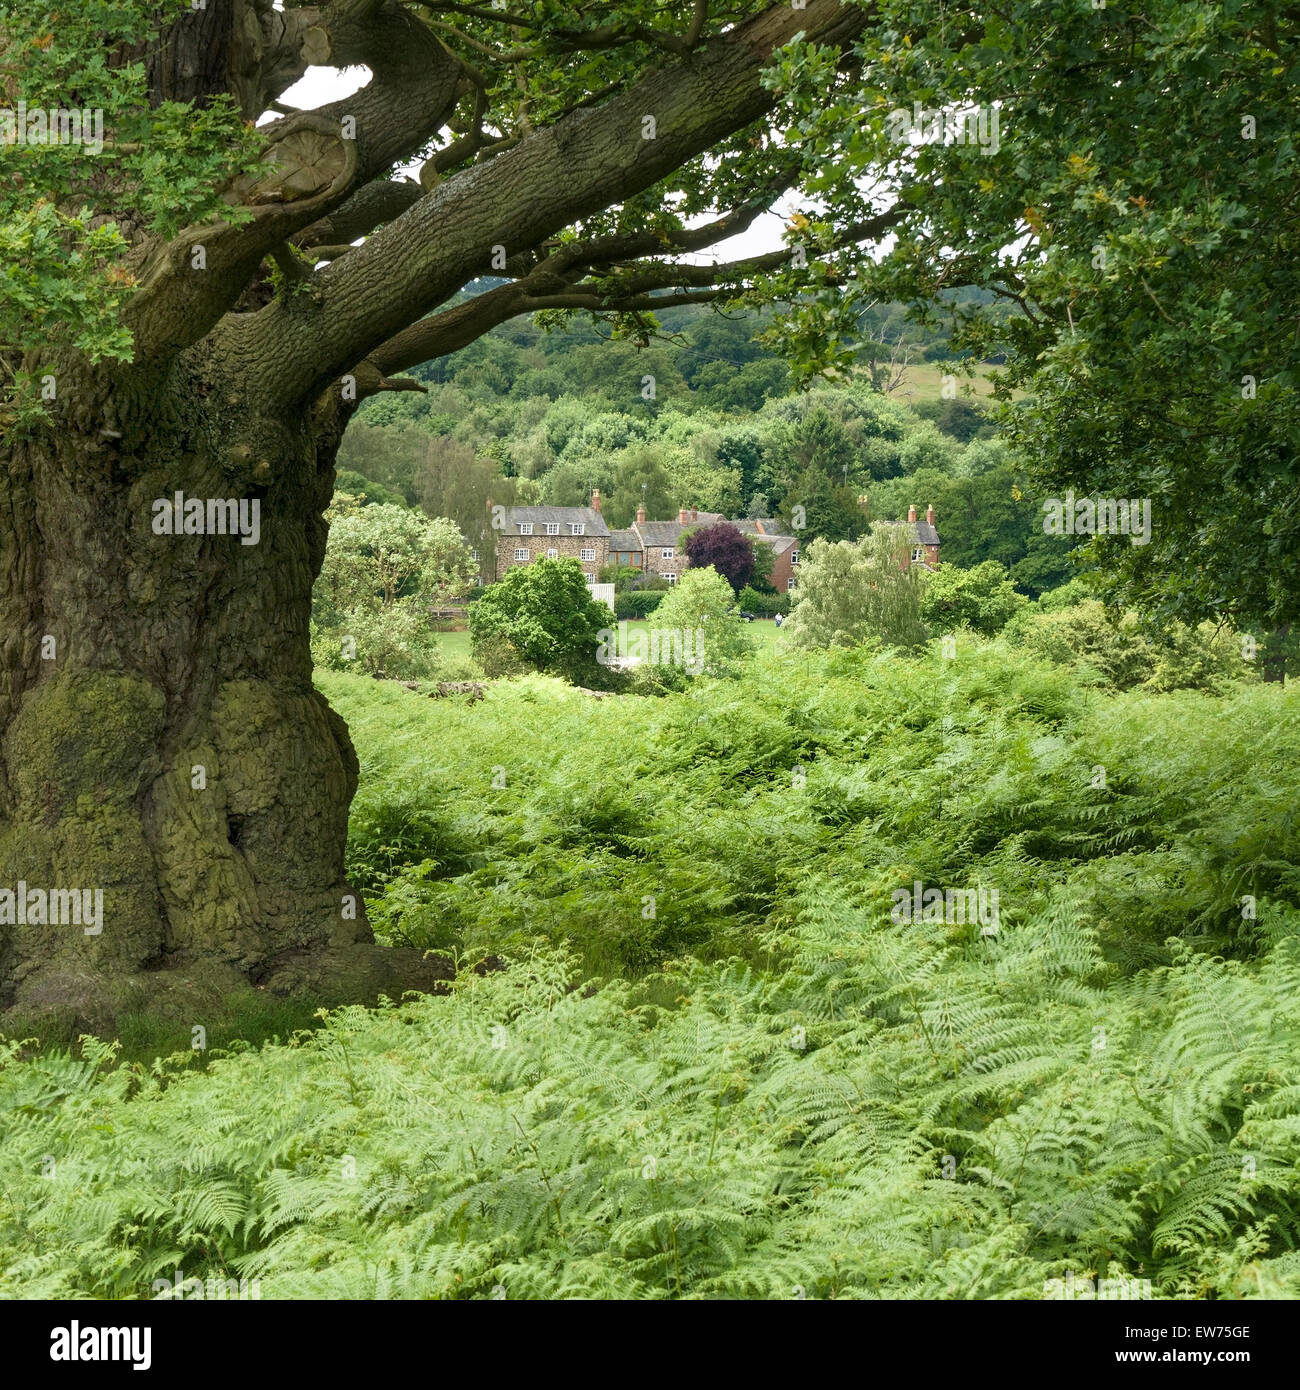 Village of Newtown Linford seen through Oak trees of Bradgate Park, Leicestershire, England, UK. Stock Photo